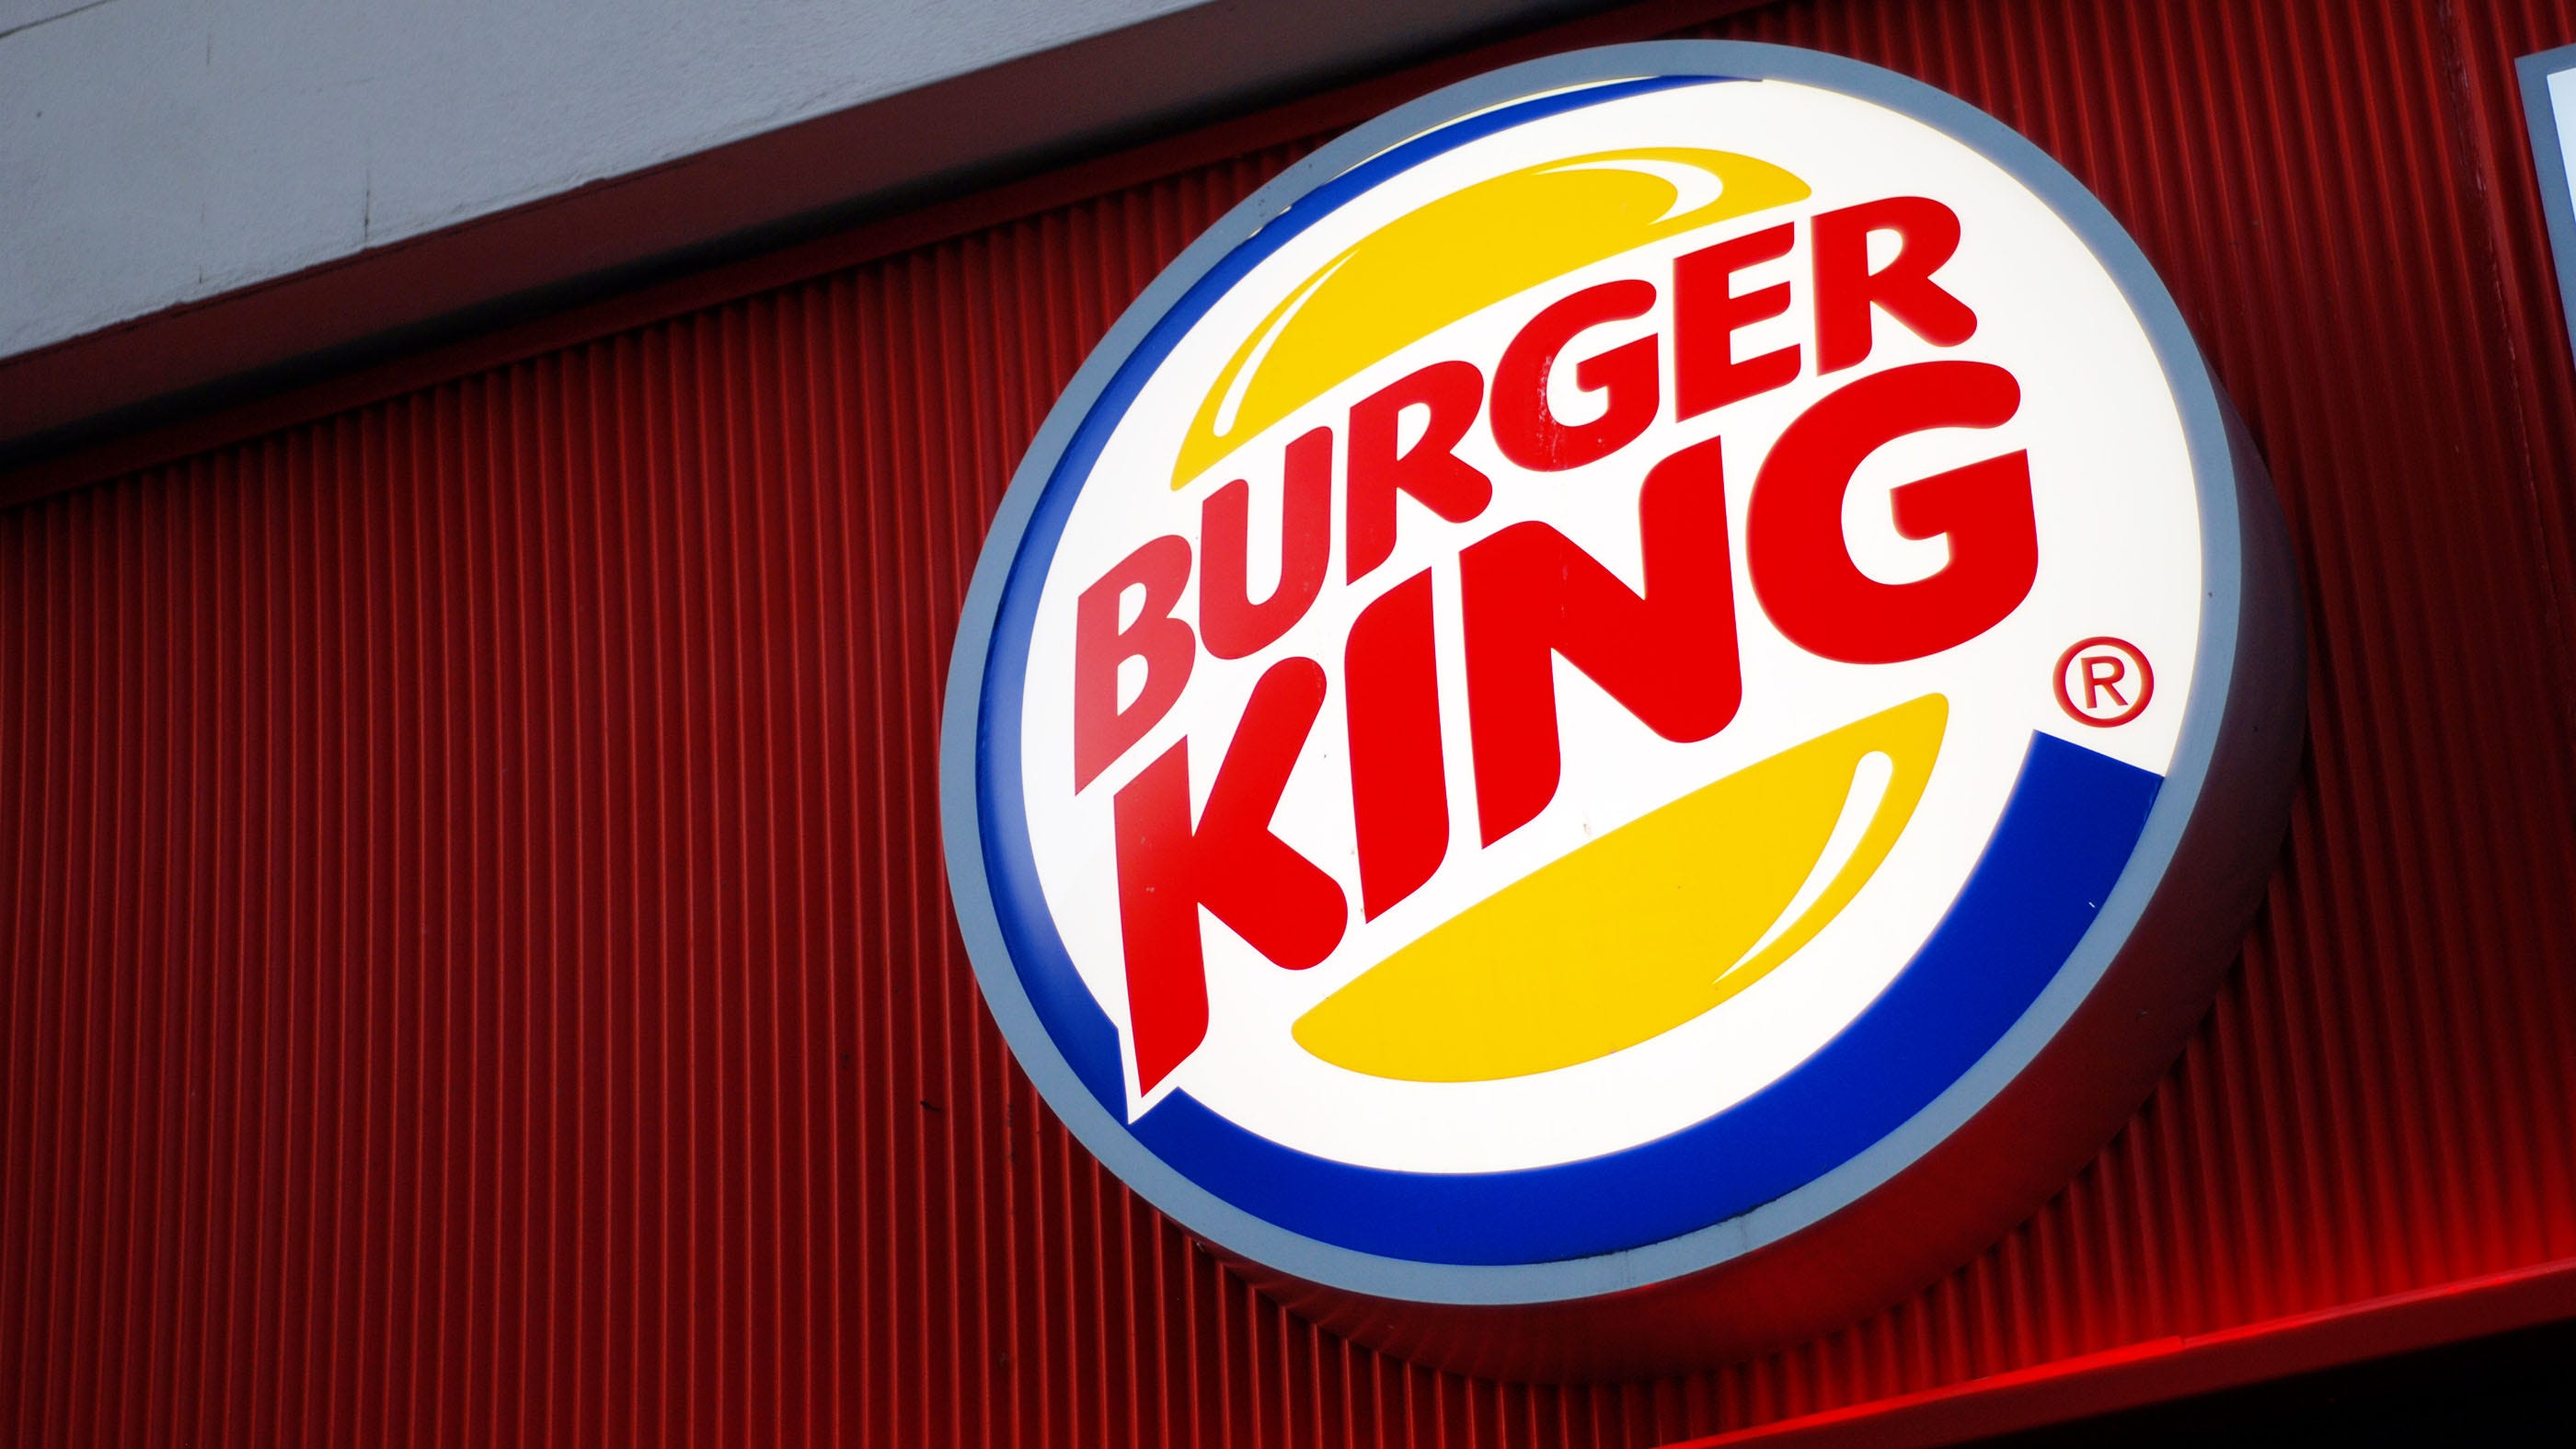 Burger King launches new logo and packaging for 2021